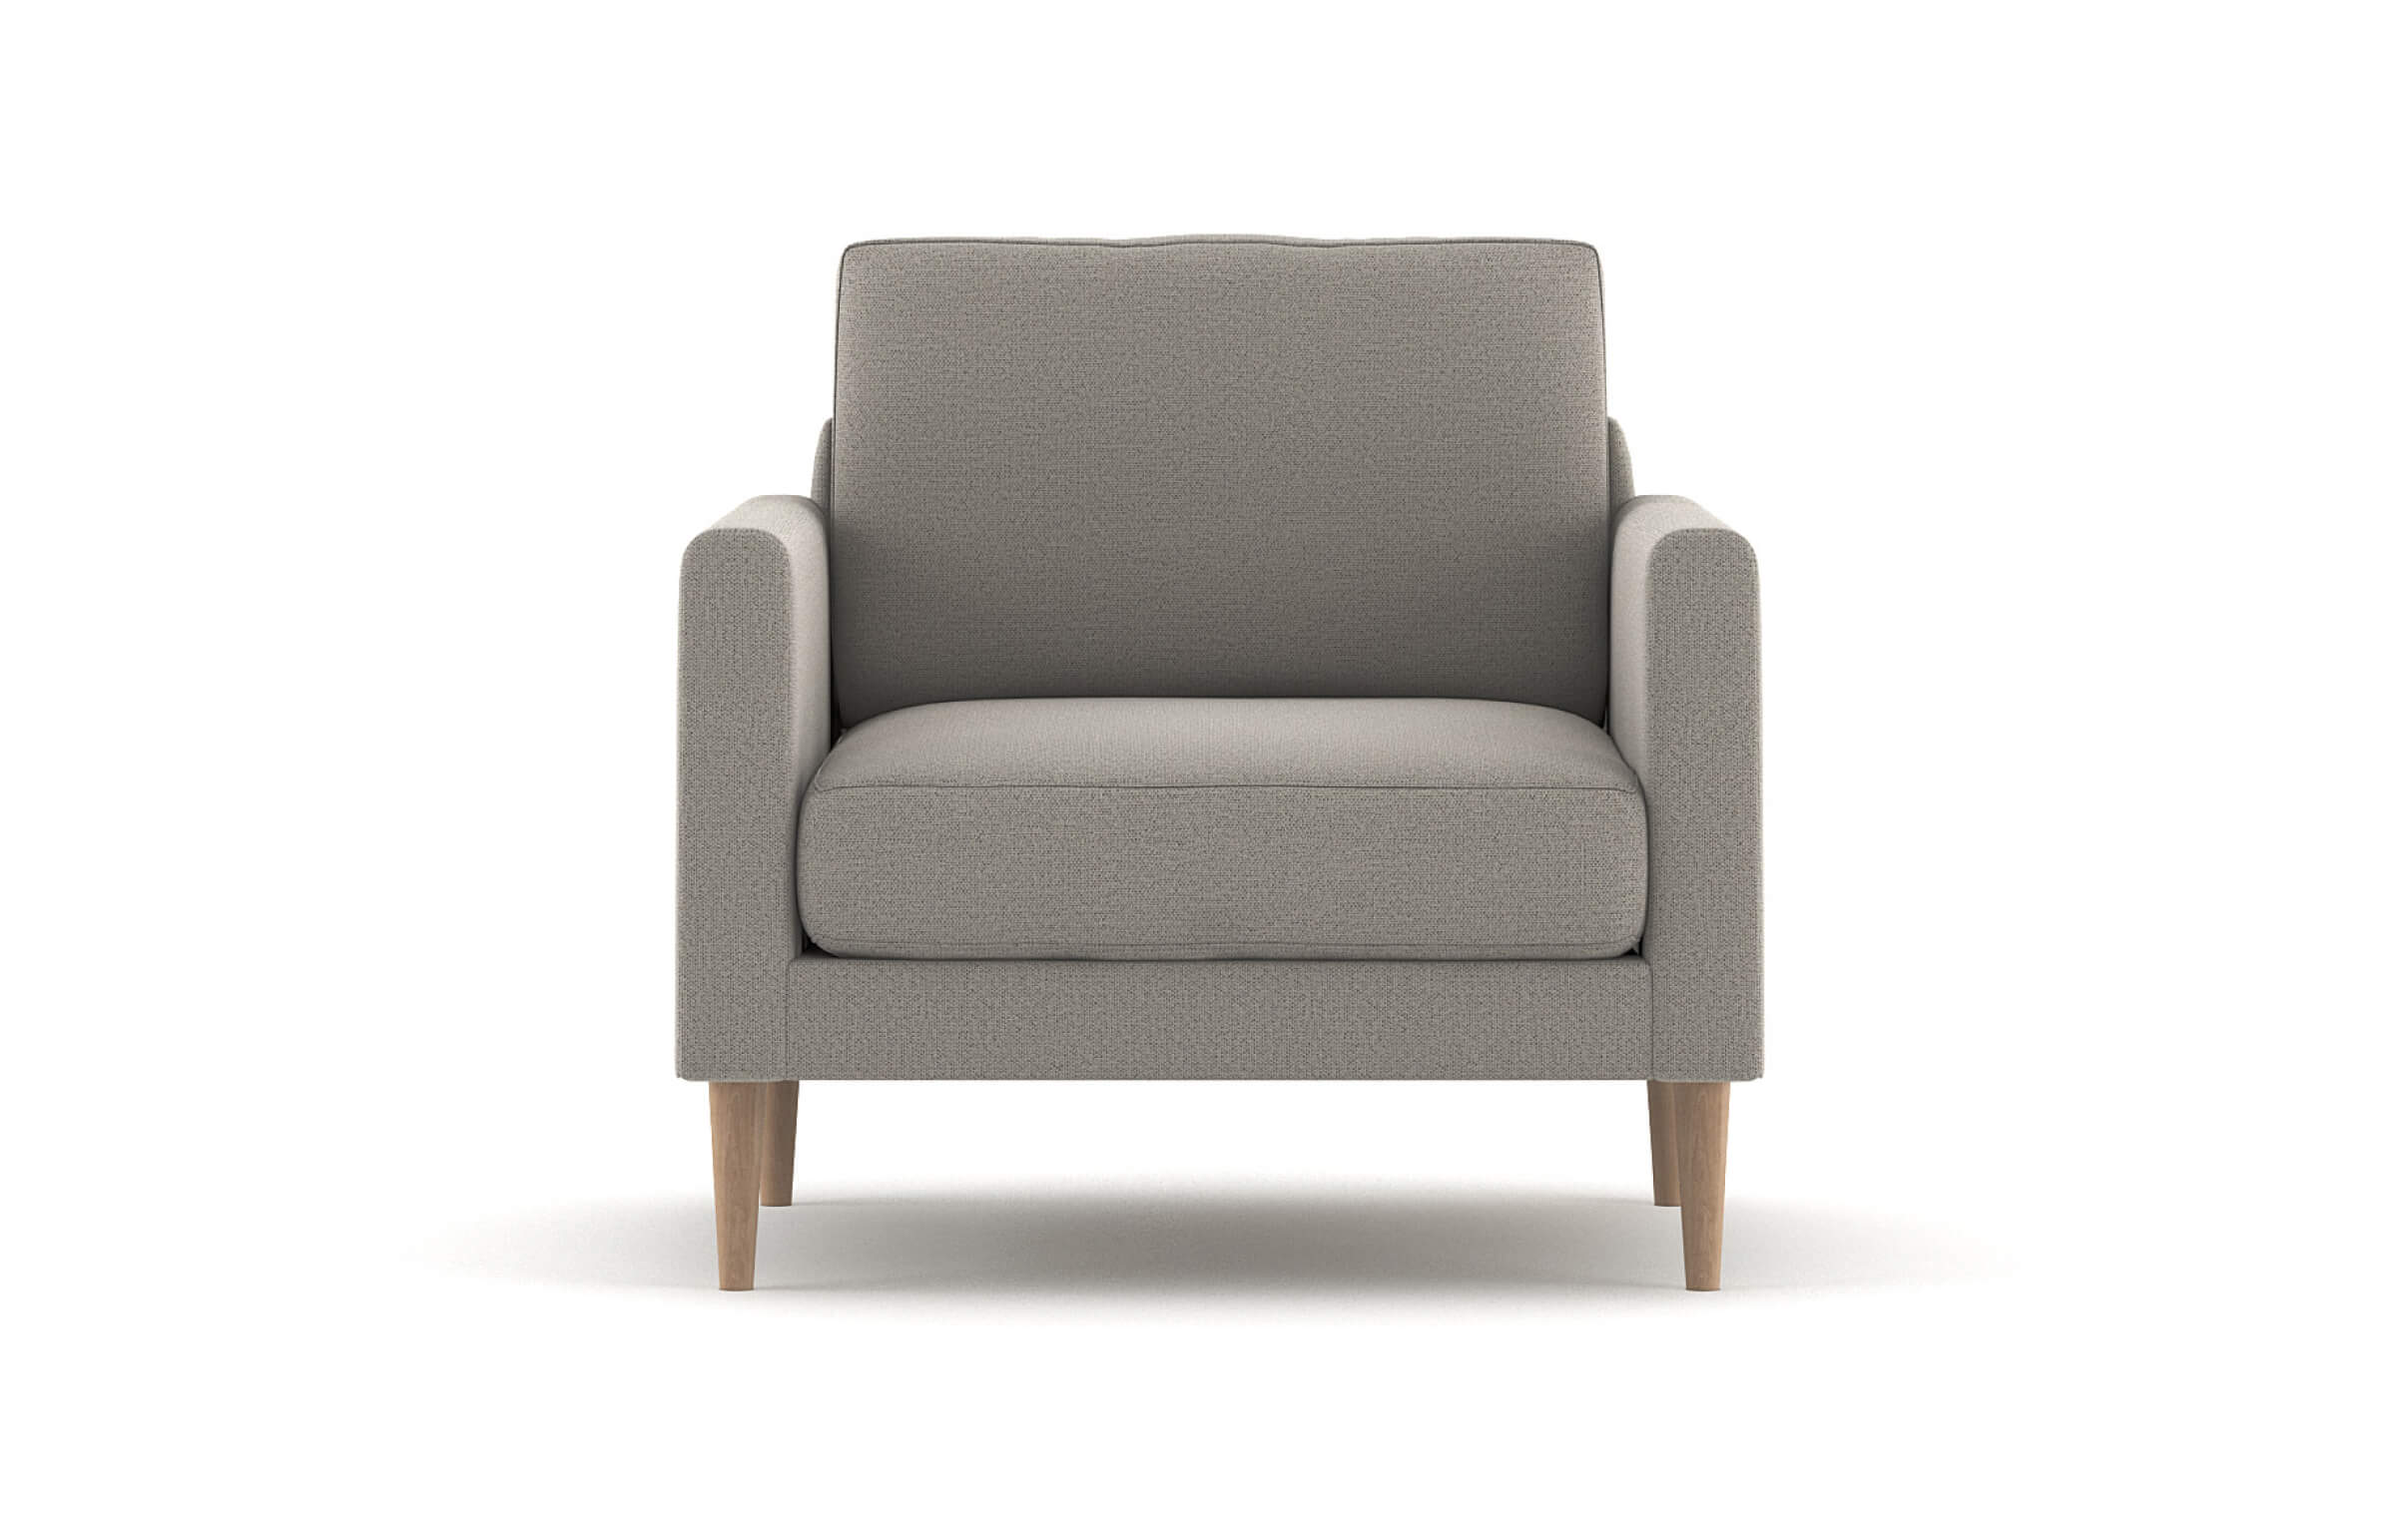 G: Shown in Texture Haze fabric with maple legs